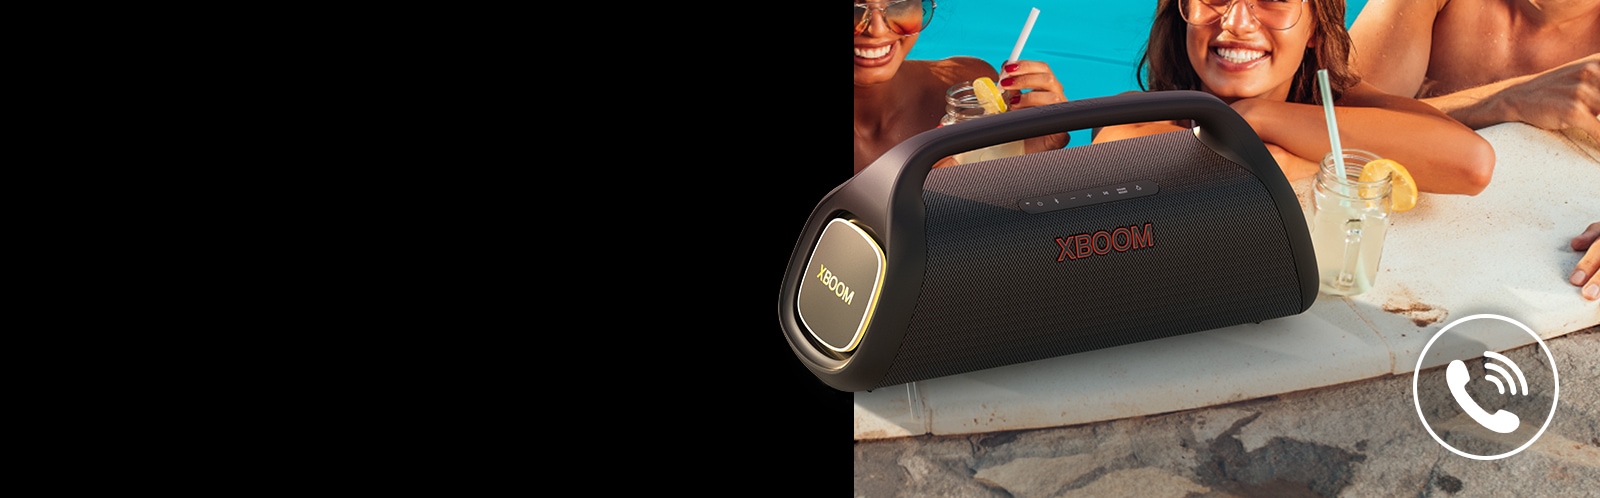 LG XBOOM Go XG9 is placed on the poolside. Three people are talking through the speaker in the pool.